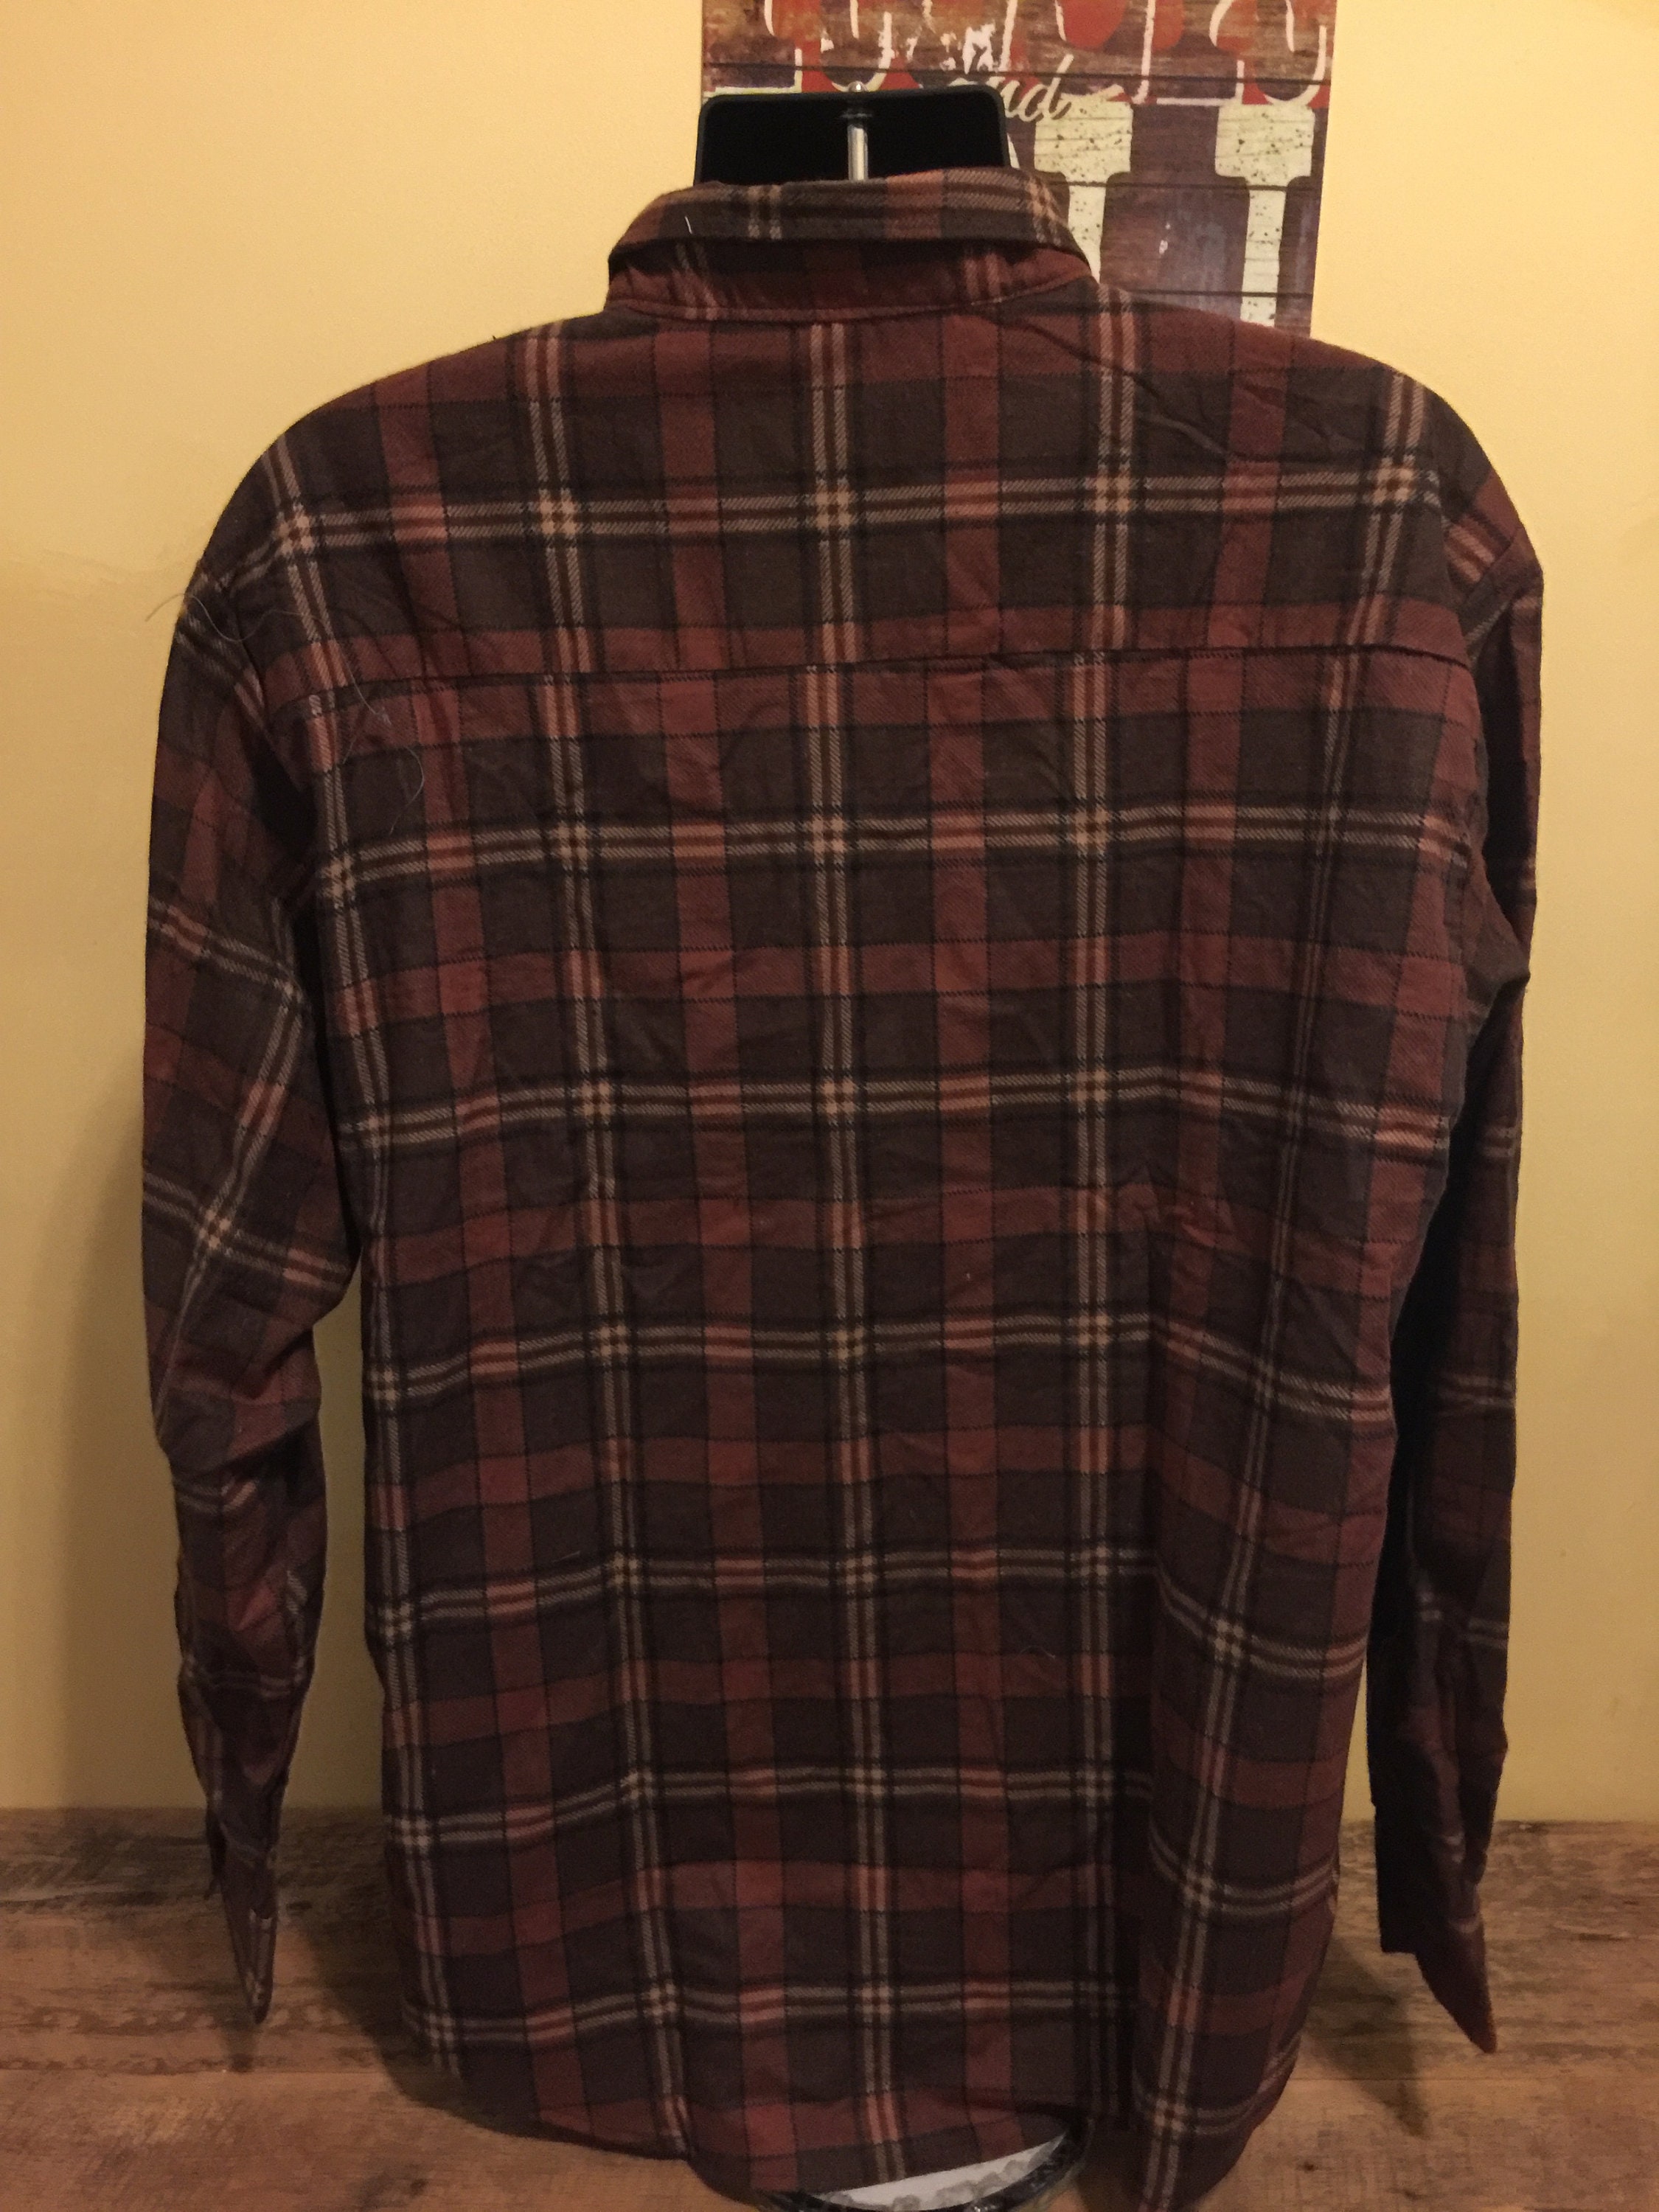 Vintage X Large Unisex Haband Flannel Shirt Made In Swaziland | Etsy